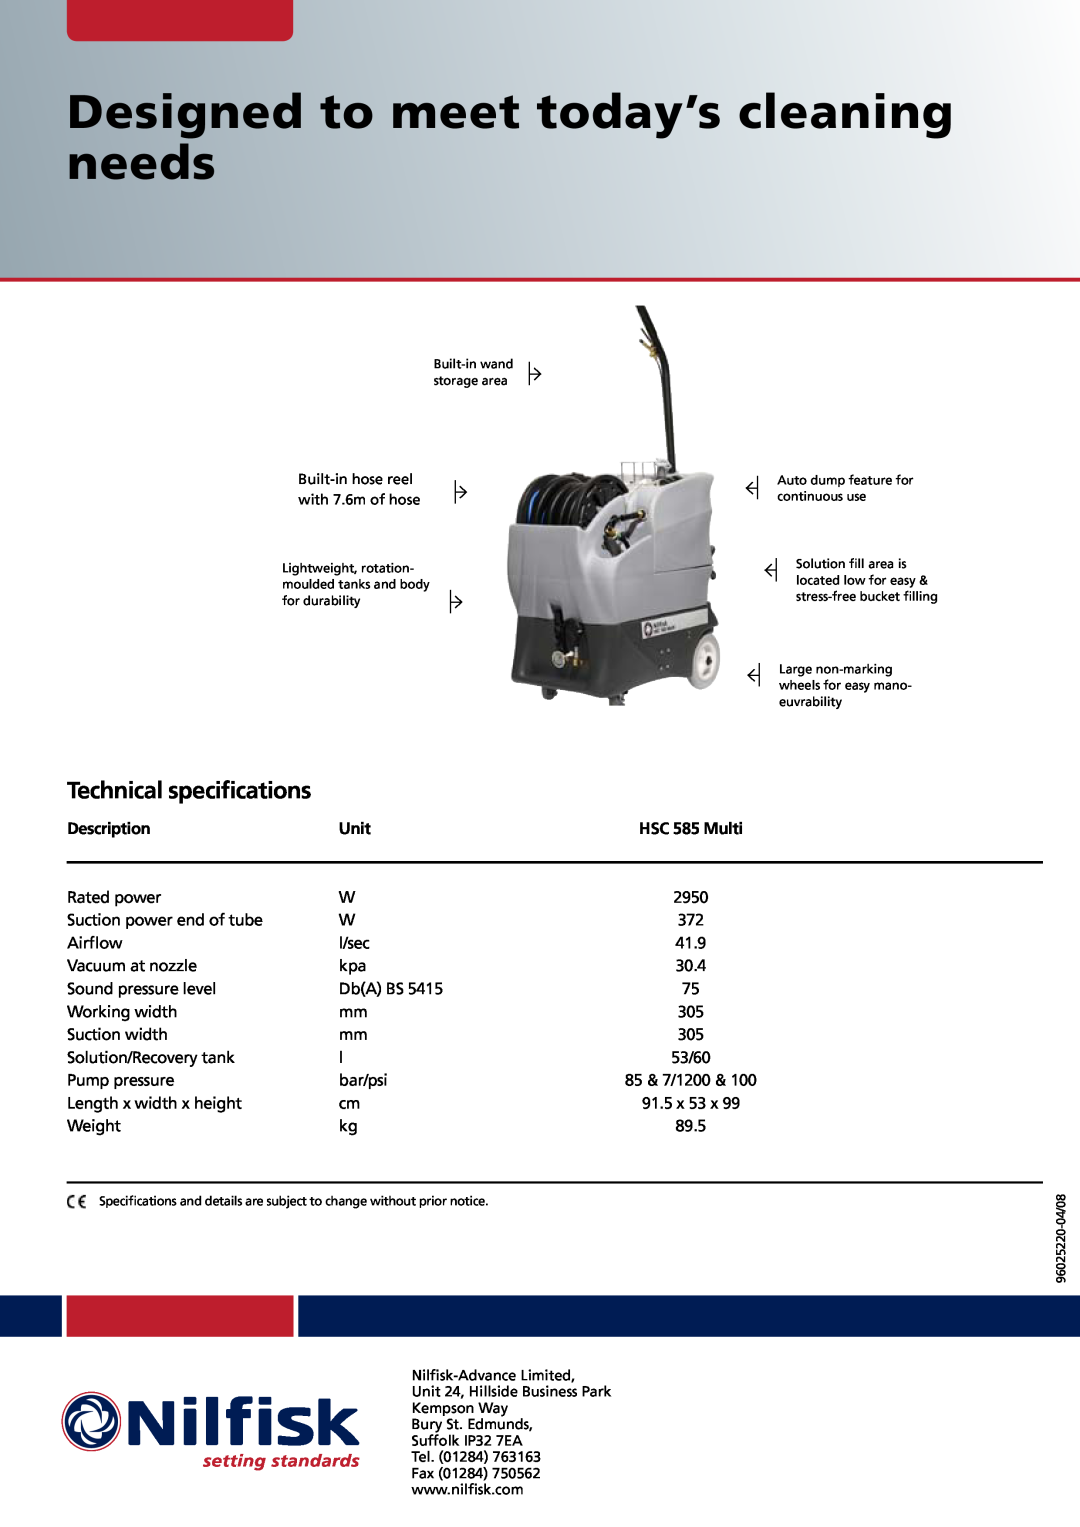 Nilfisk-Advance America HSC 585 Multi technical specifications Designed to meet today’s cleaning needs, Description, Unit 